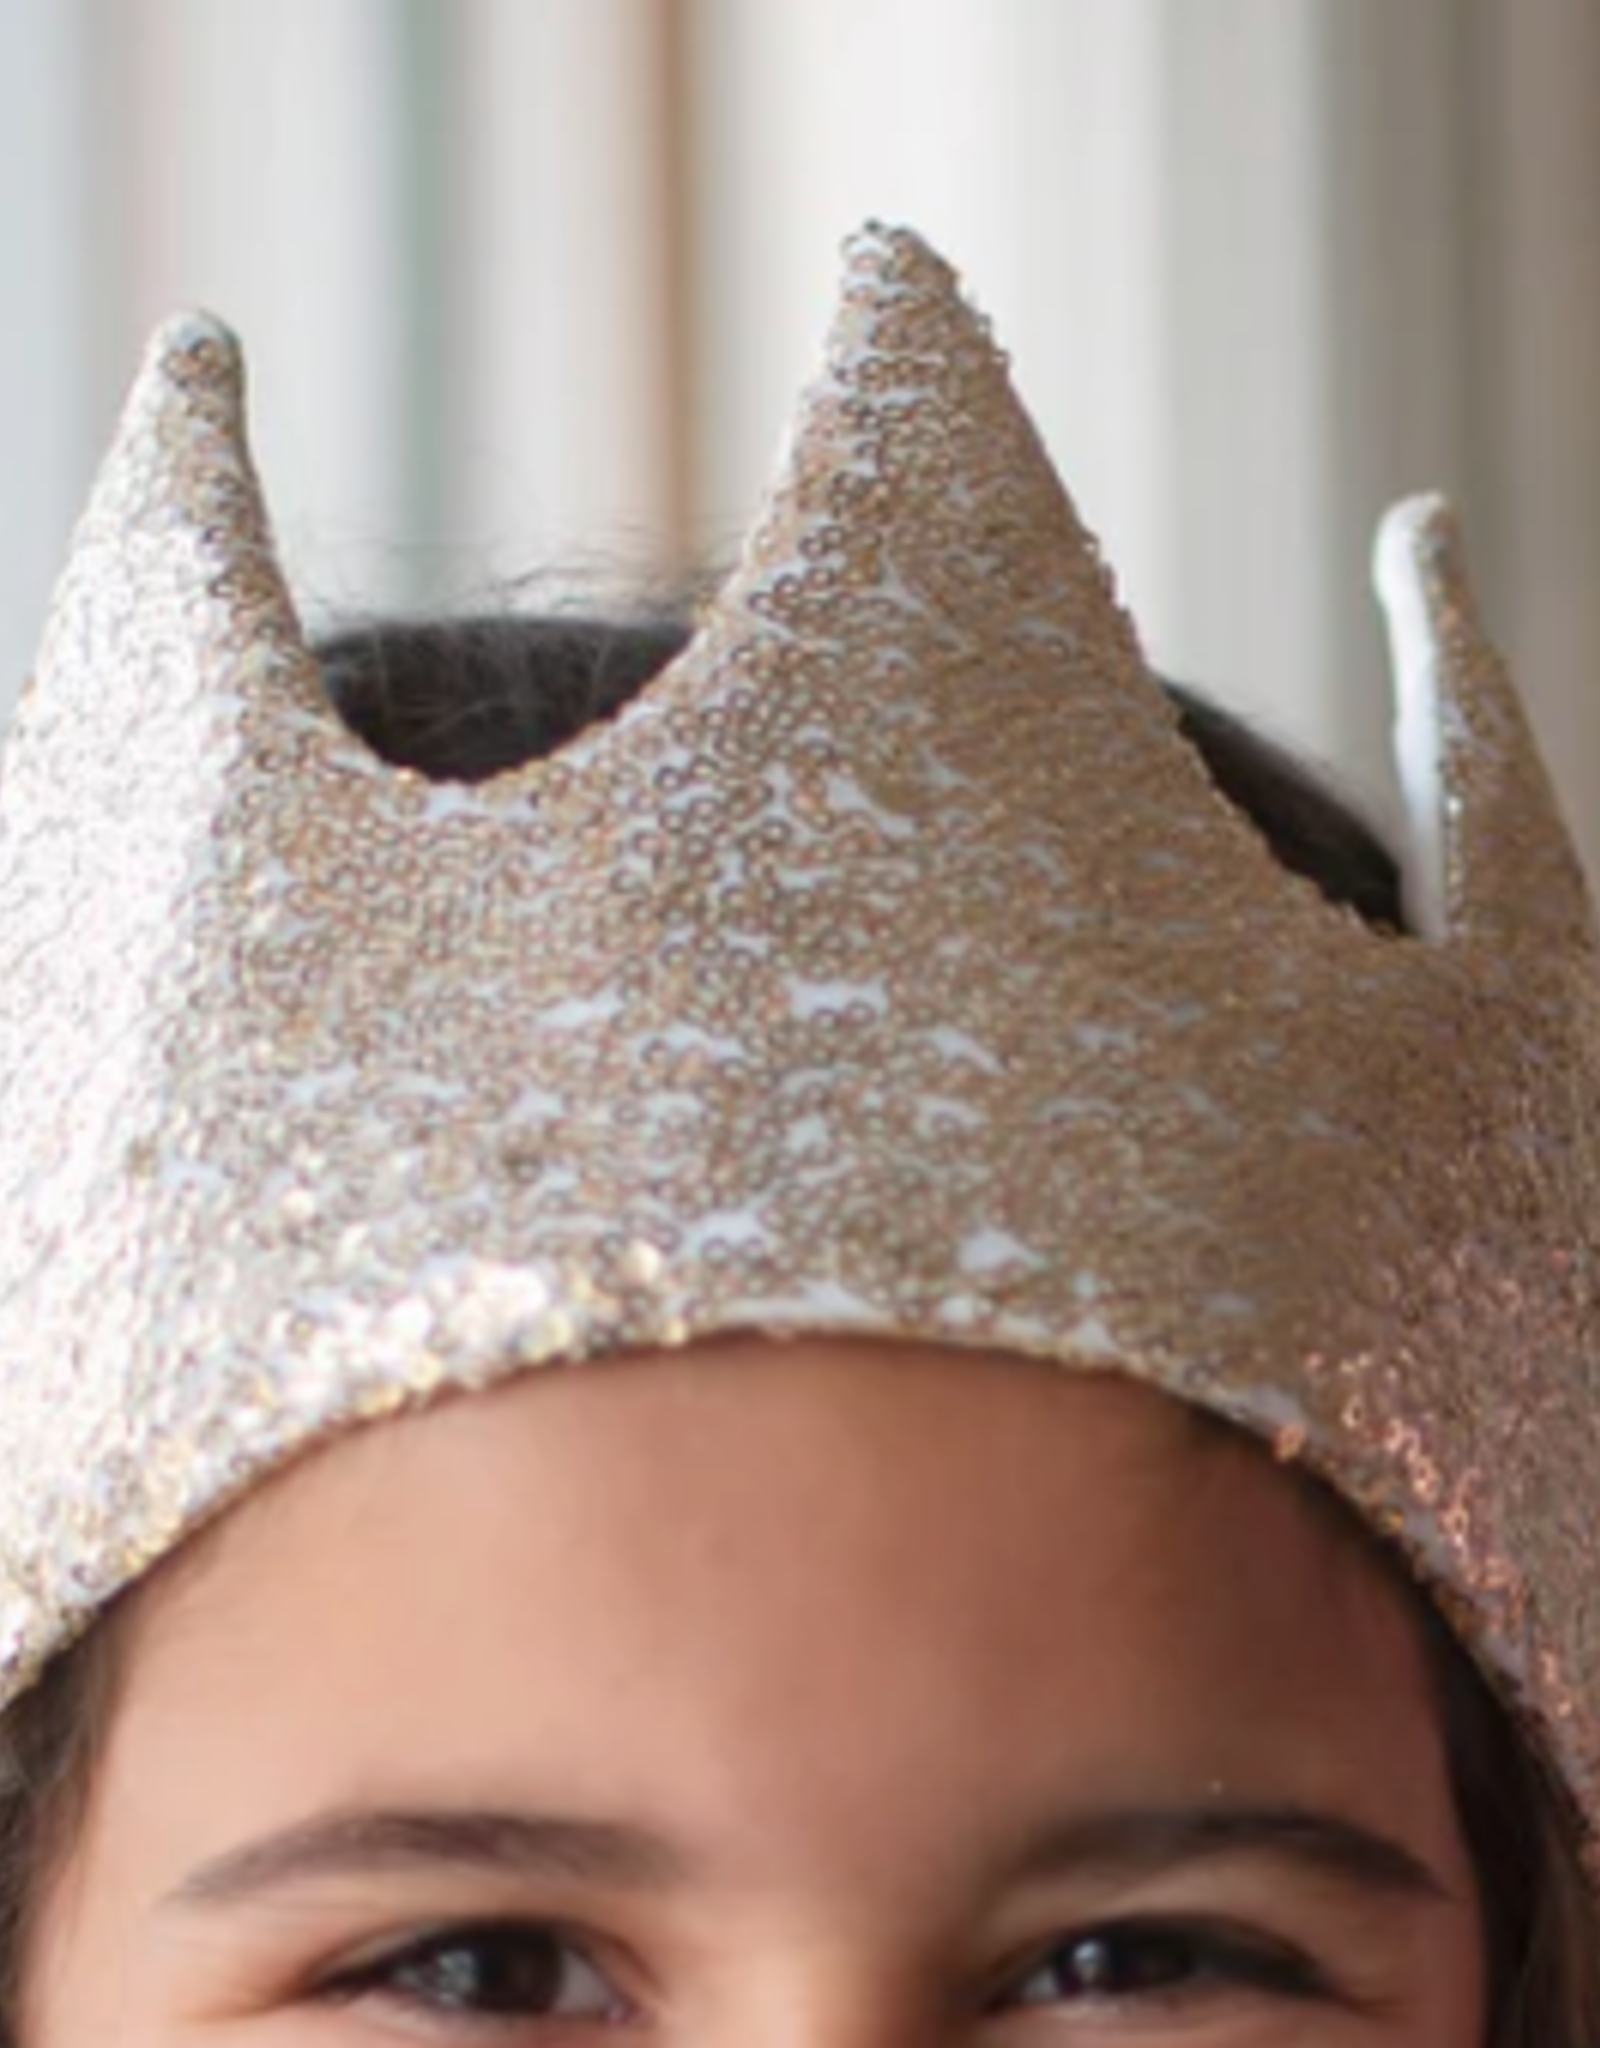 Great Pretenders Gracious Gold Sequins Crown